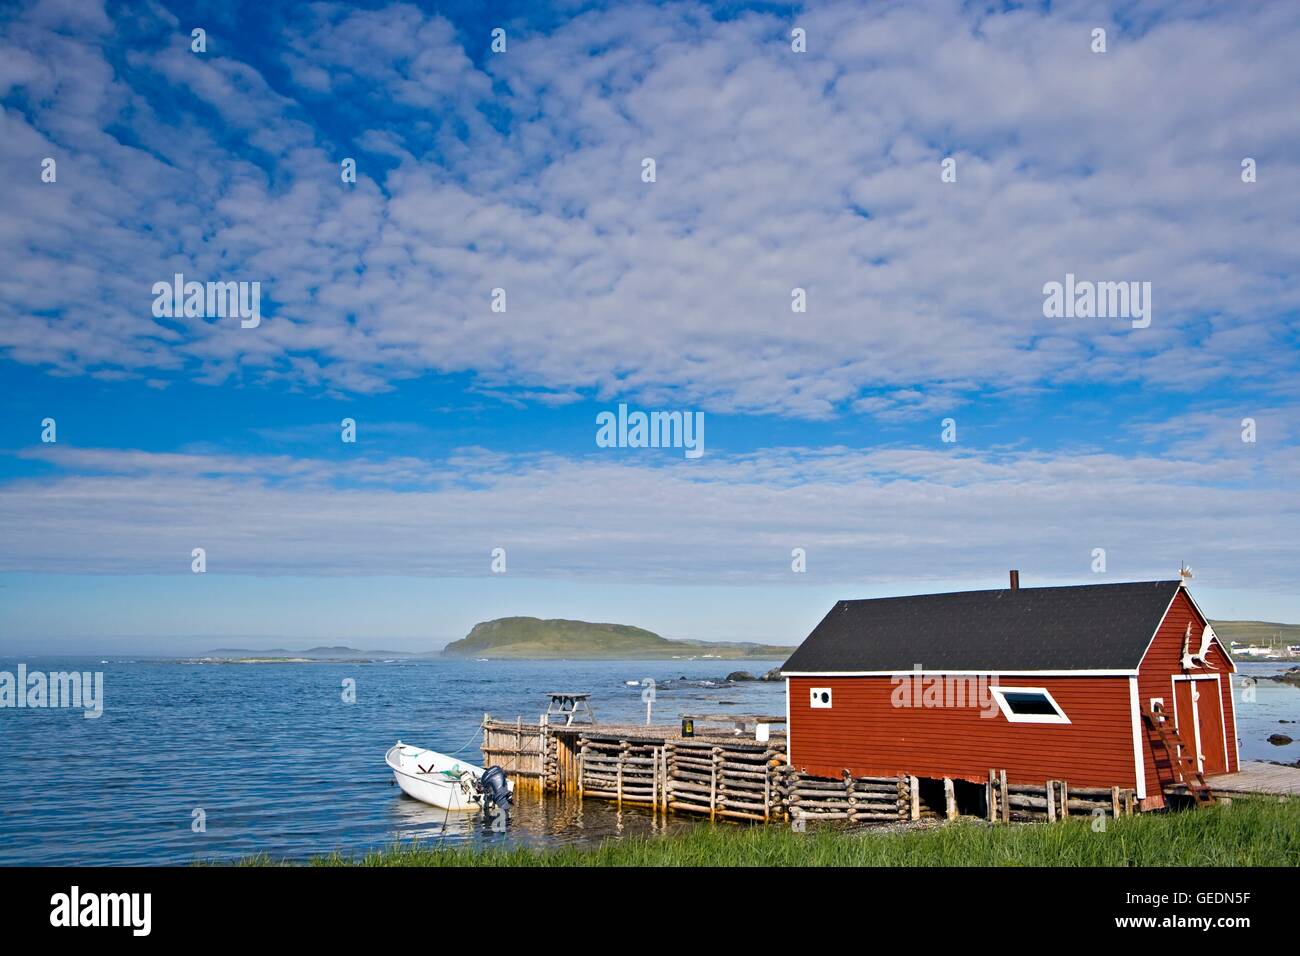 geography / travel, Canada, Newfoundland, L'Anse aux Meadows, A red fishing stage in the town of L'Anse aux Meadows, Northern Peninsula, Great Northern Peninsula, Viking Trail, Trails to the Stock Photo